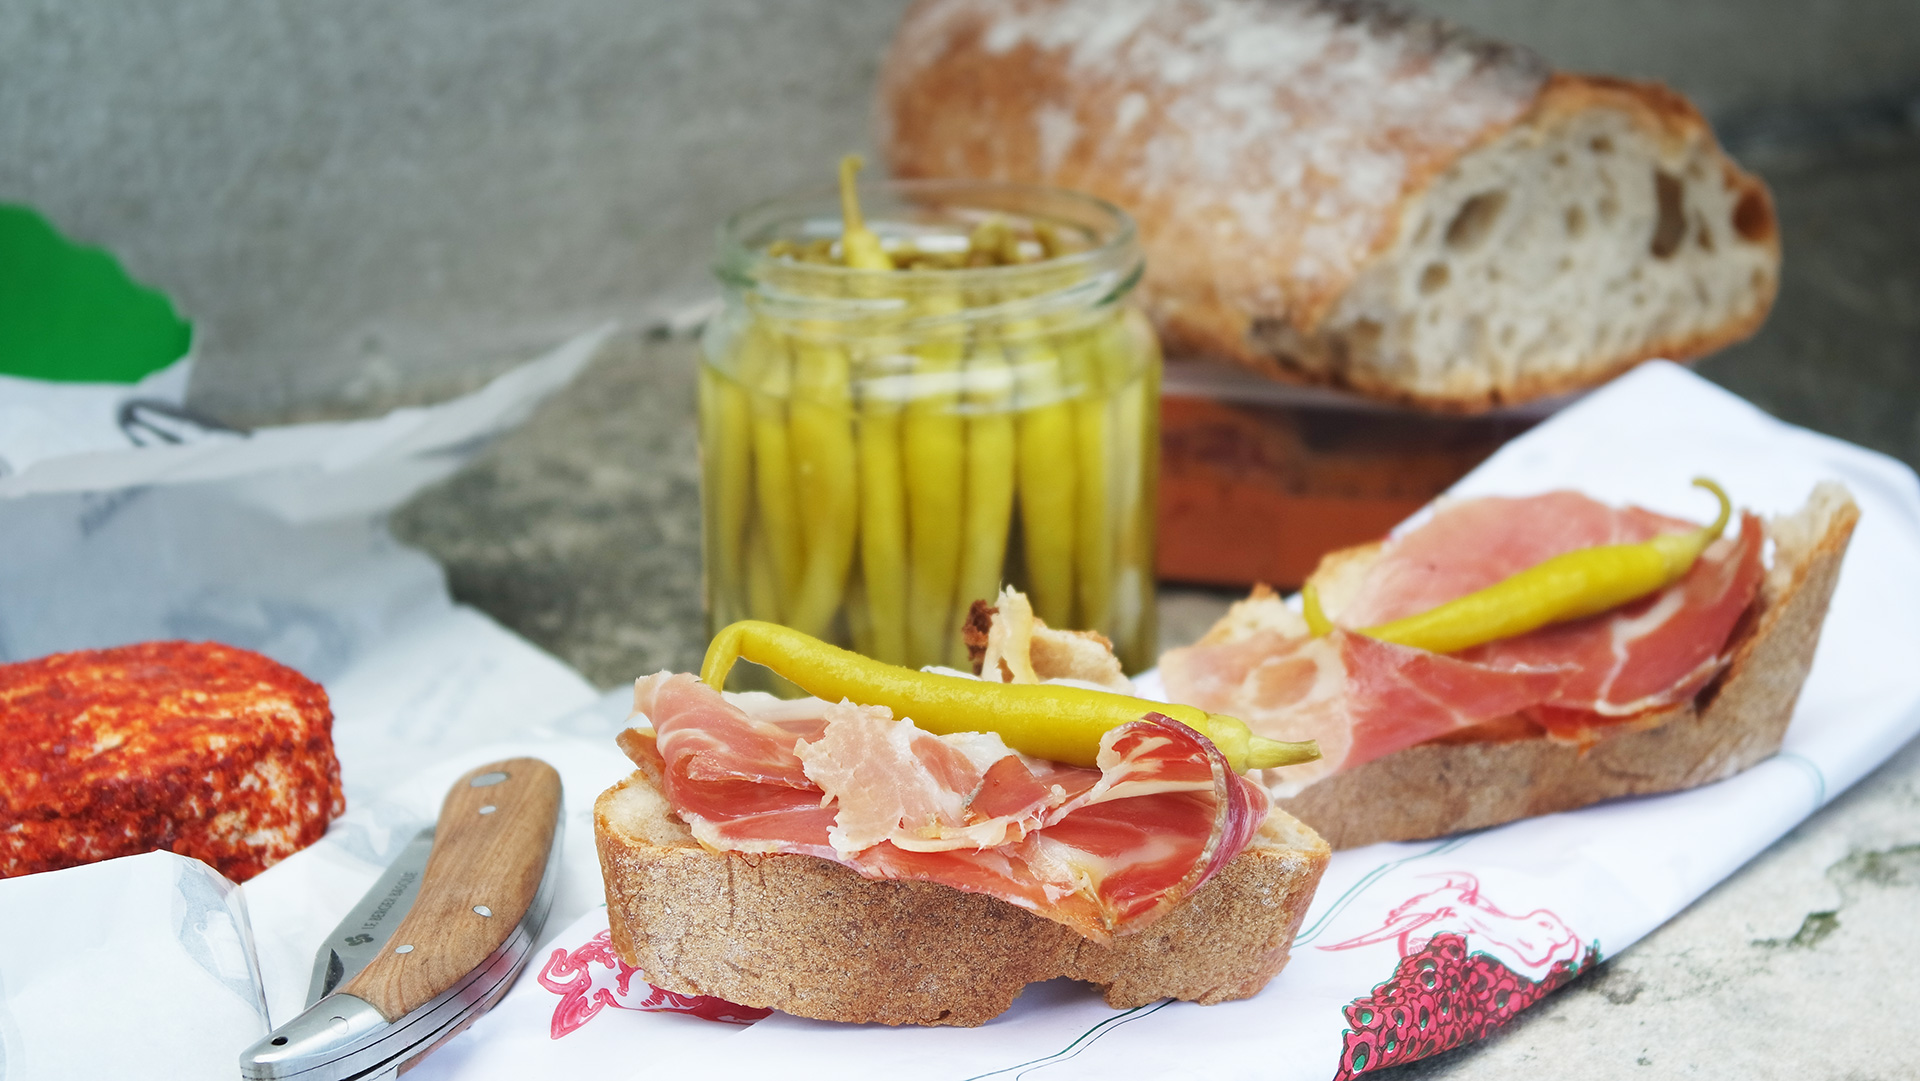 bread, ham and pickles